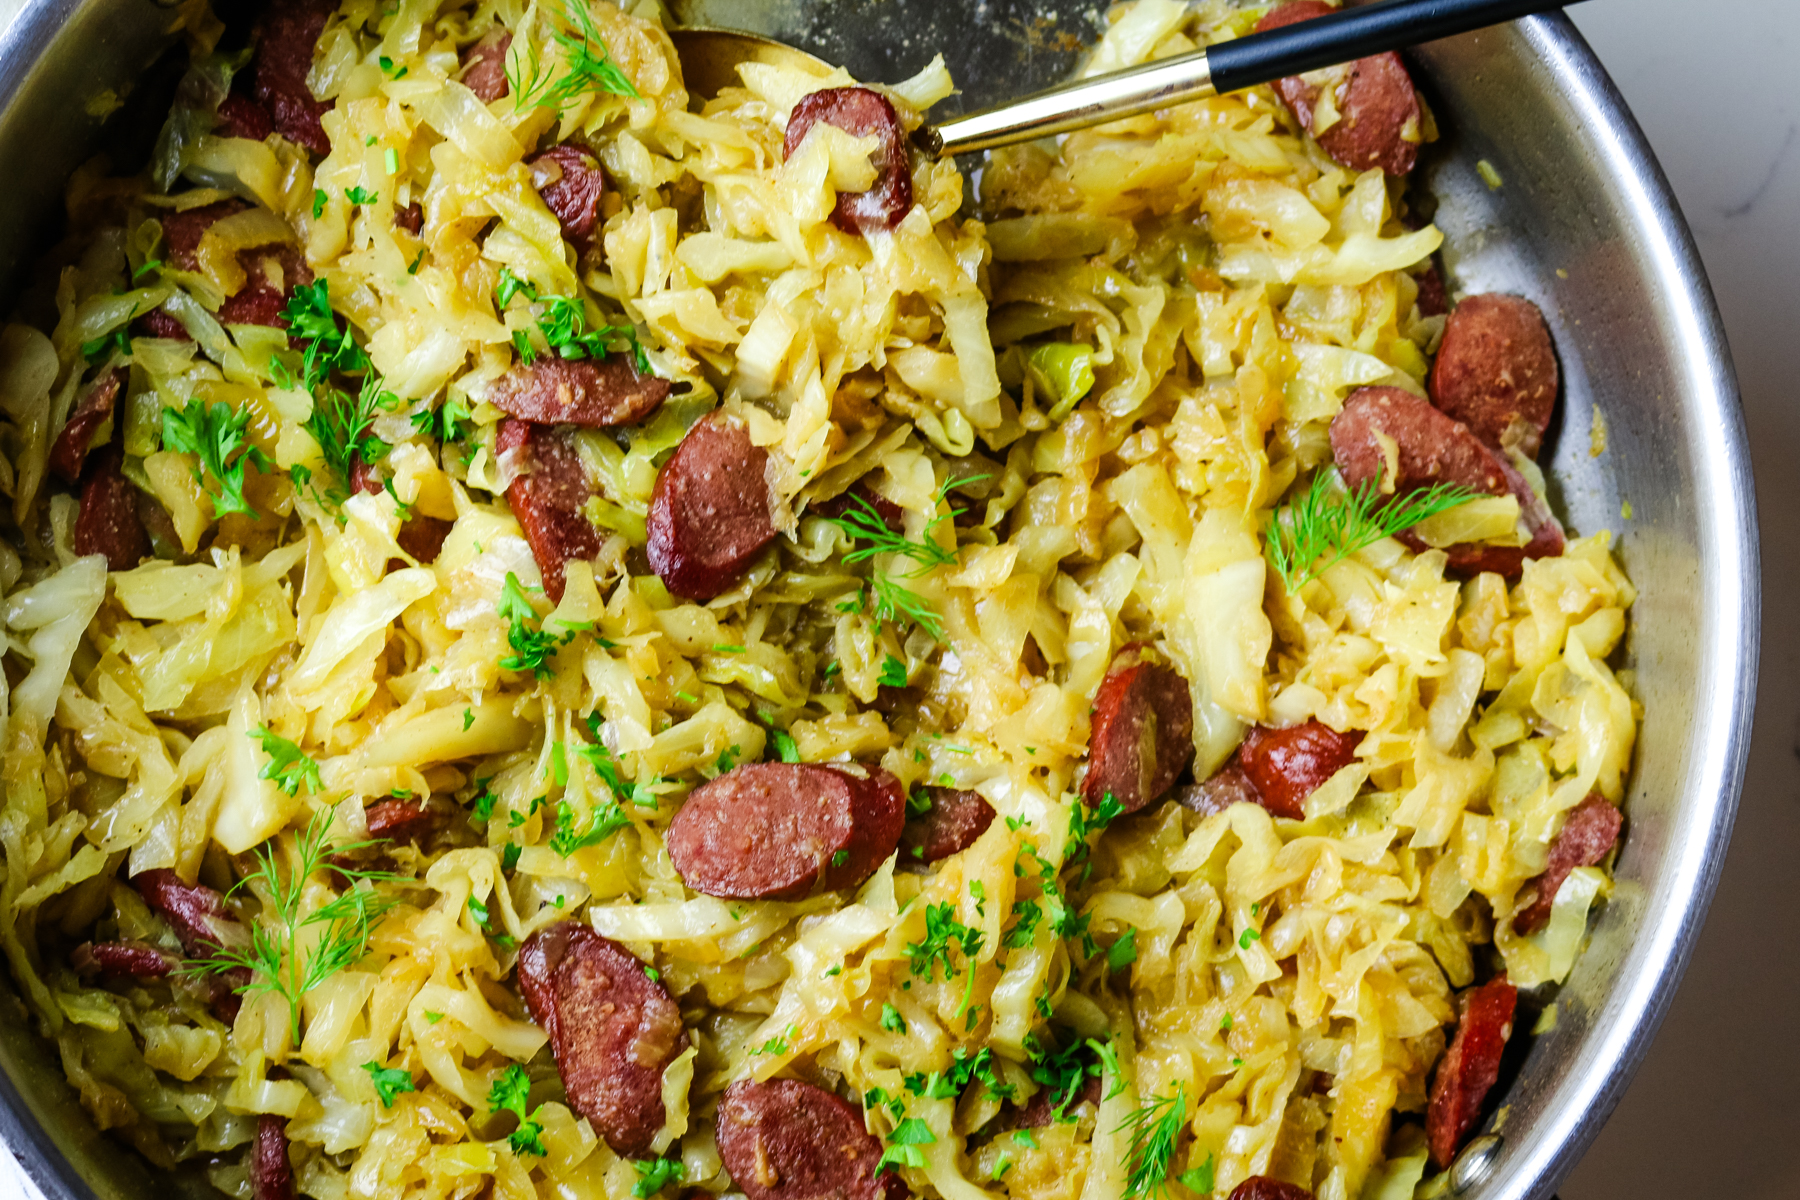 cabbage with polish sausage fried in a pan with fresh herbs garnished.